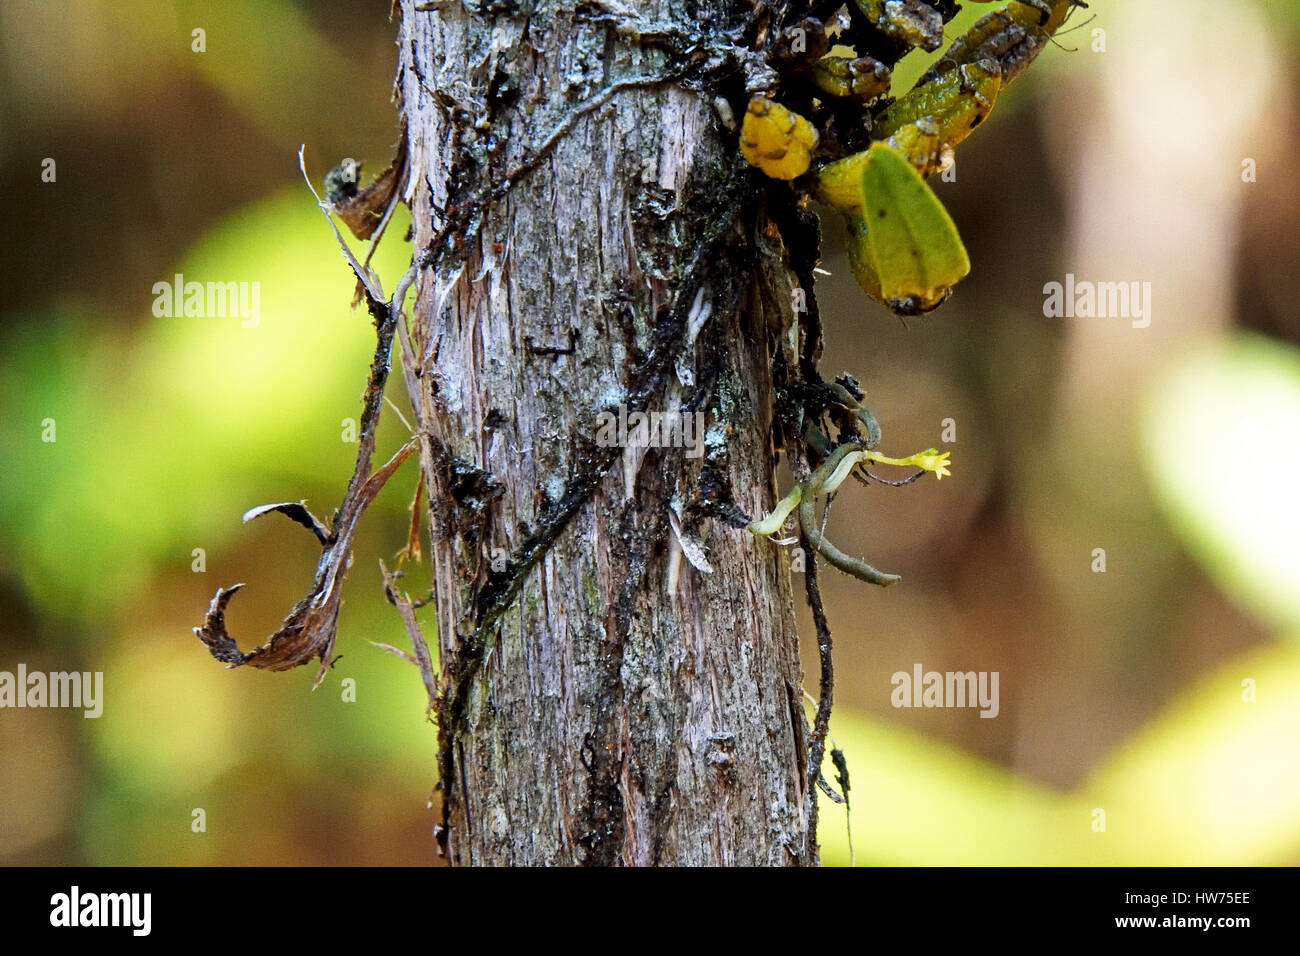 The World's smallest Orchid (Taeniophyllum obtusum) growing on a small tree in Phu Luang Wildlife Sanctuary in Thailand Stock Photo